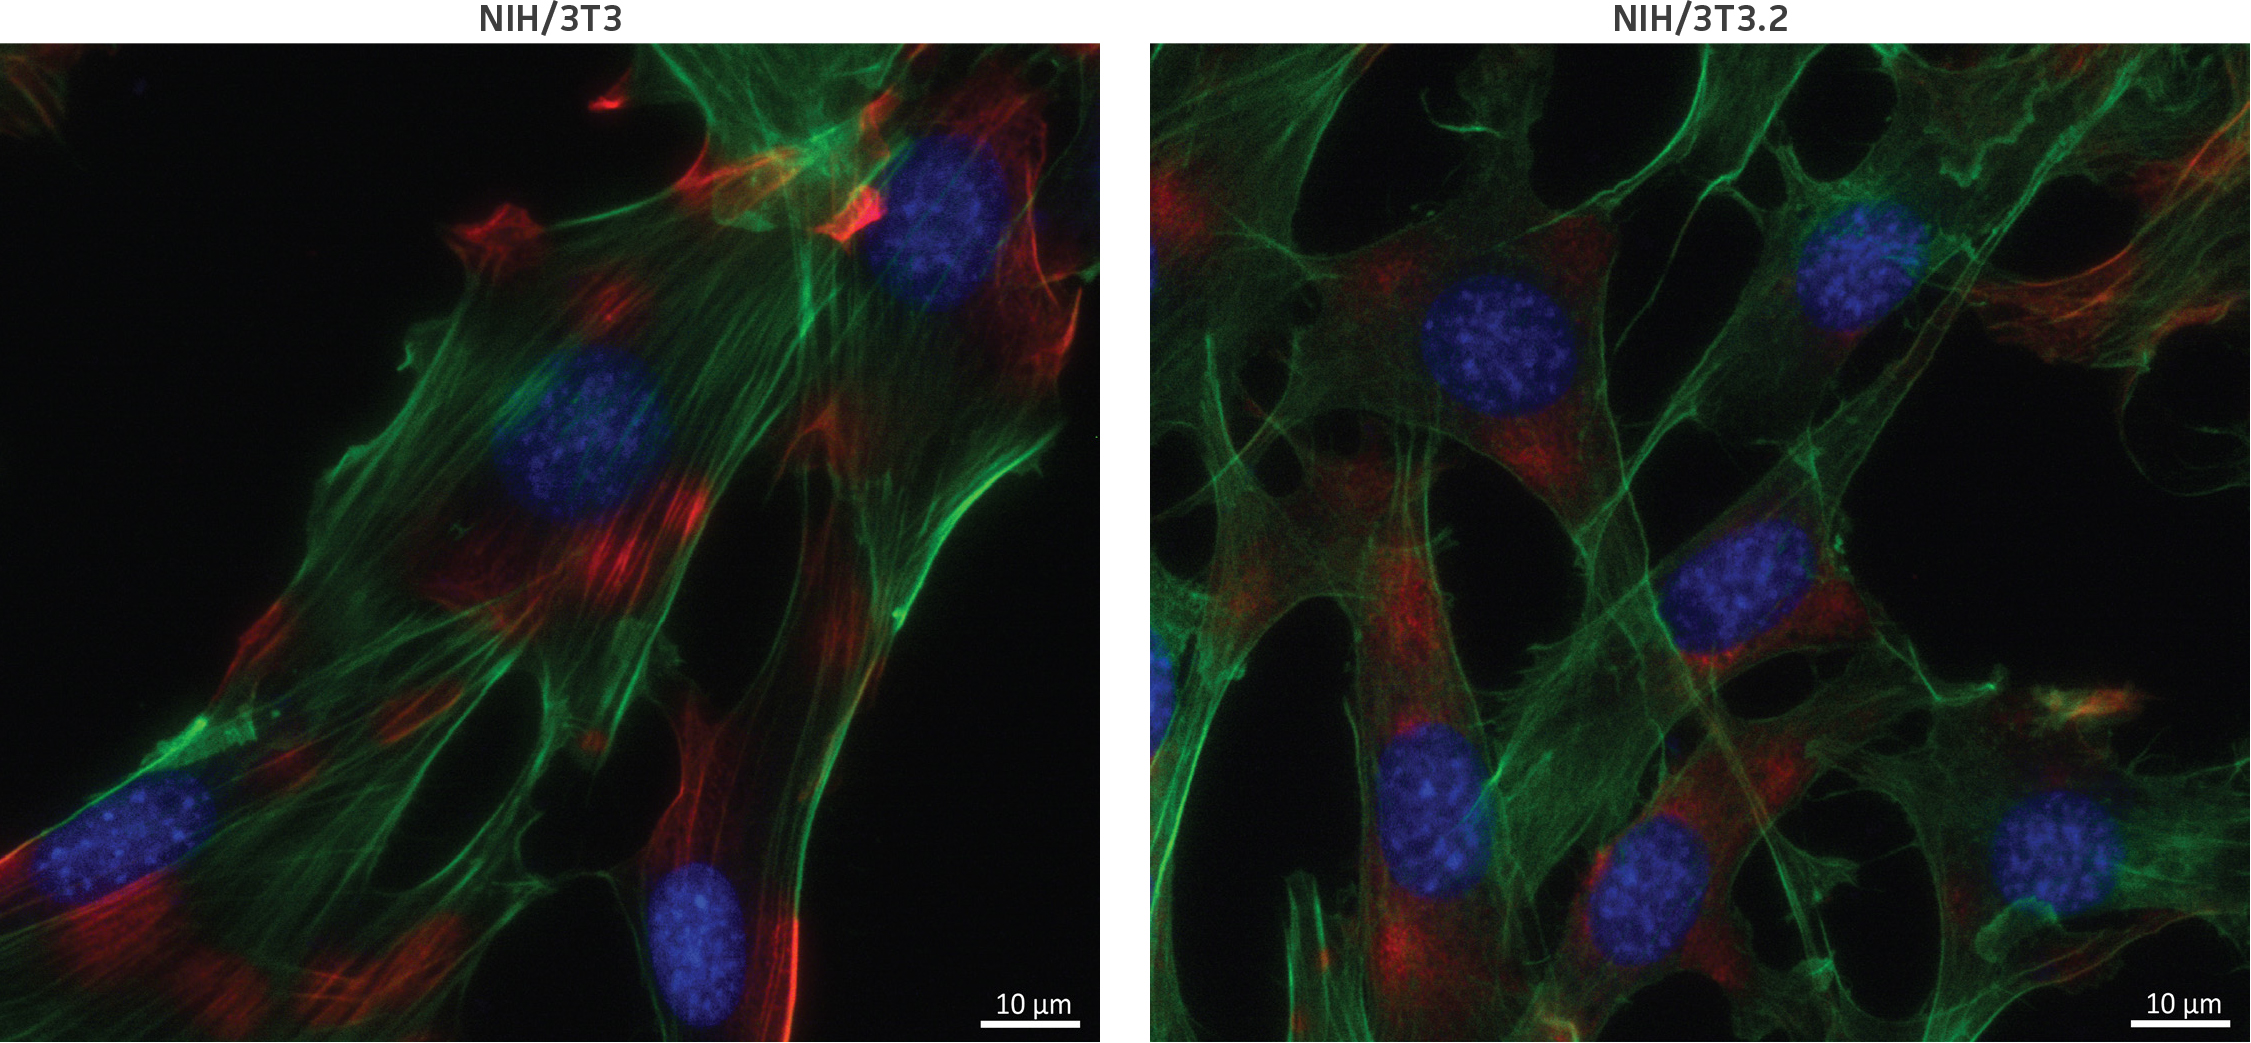 Immunofluorescent staining of alpha-smooth muscle actin and F-actin on parental and clonal derivative cells. The NIH/3T3.2 clonal derivative and NIH/3T3 parental cell lines demonstrated similar expression of alpha-smooth muscle actin (red) and F-actin (green).